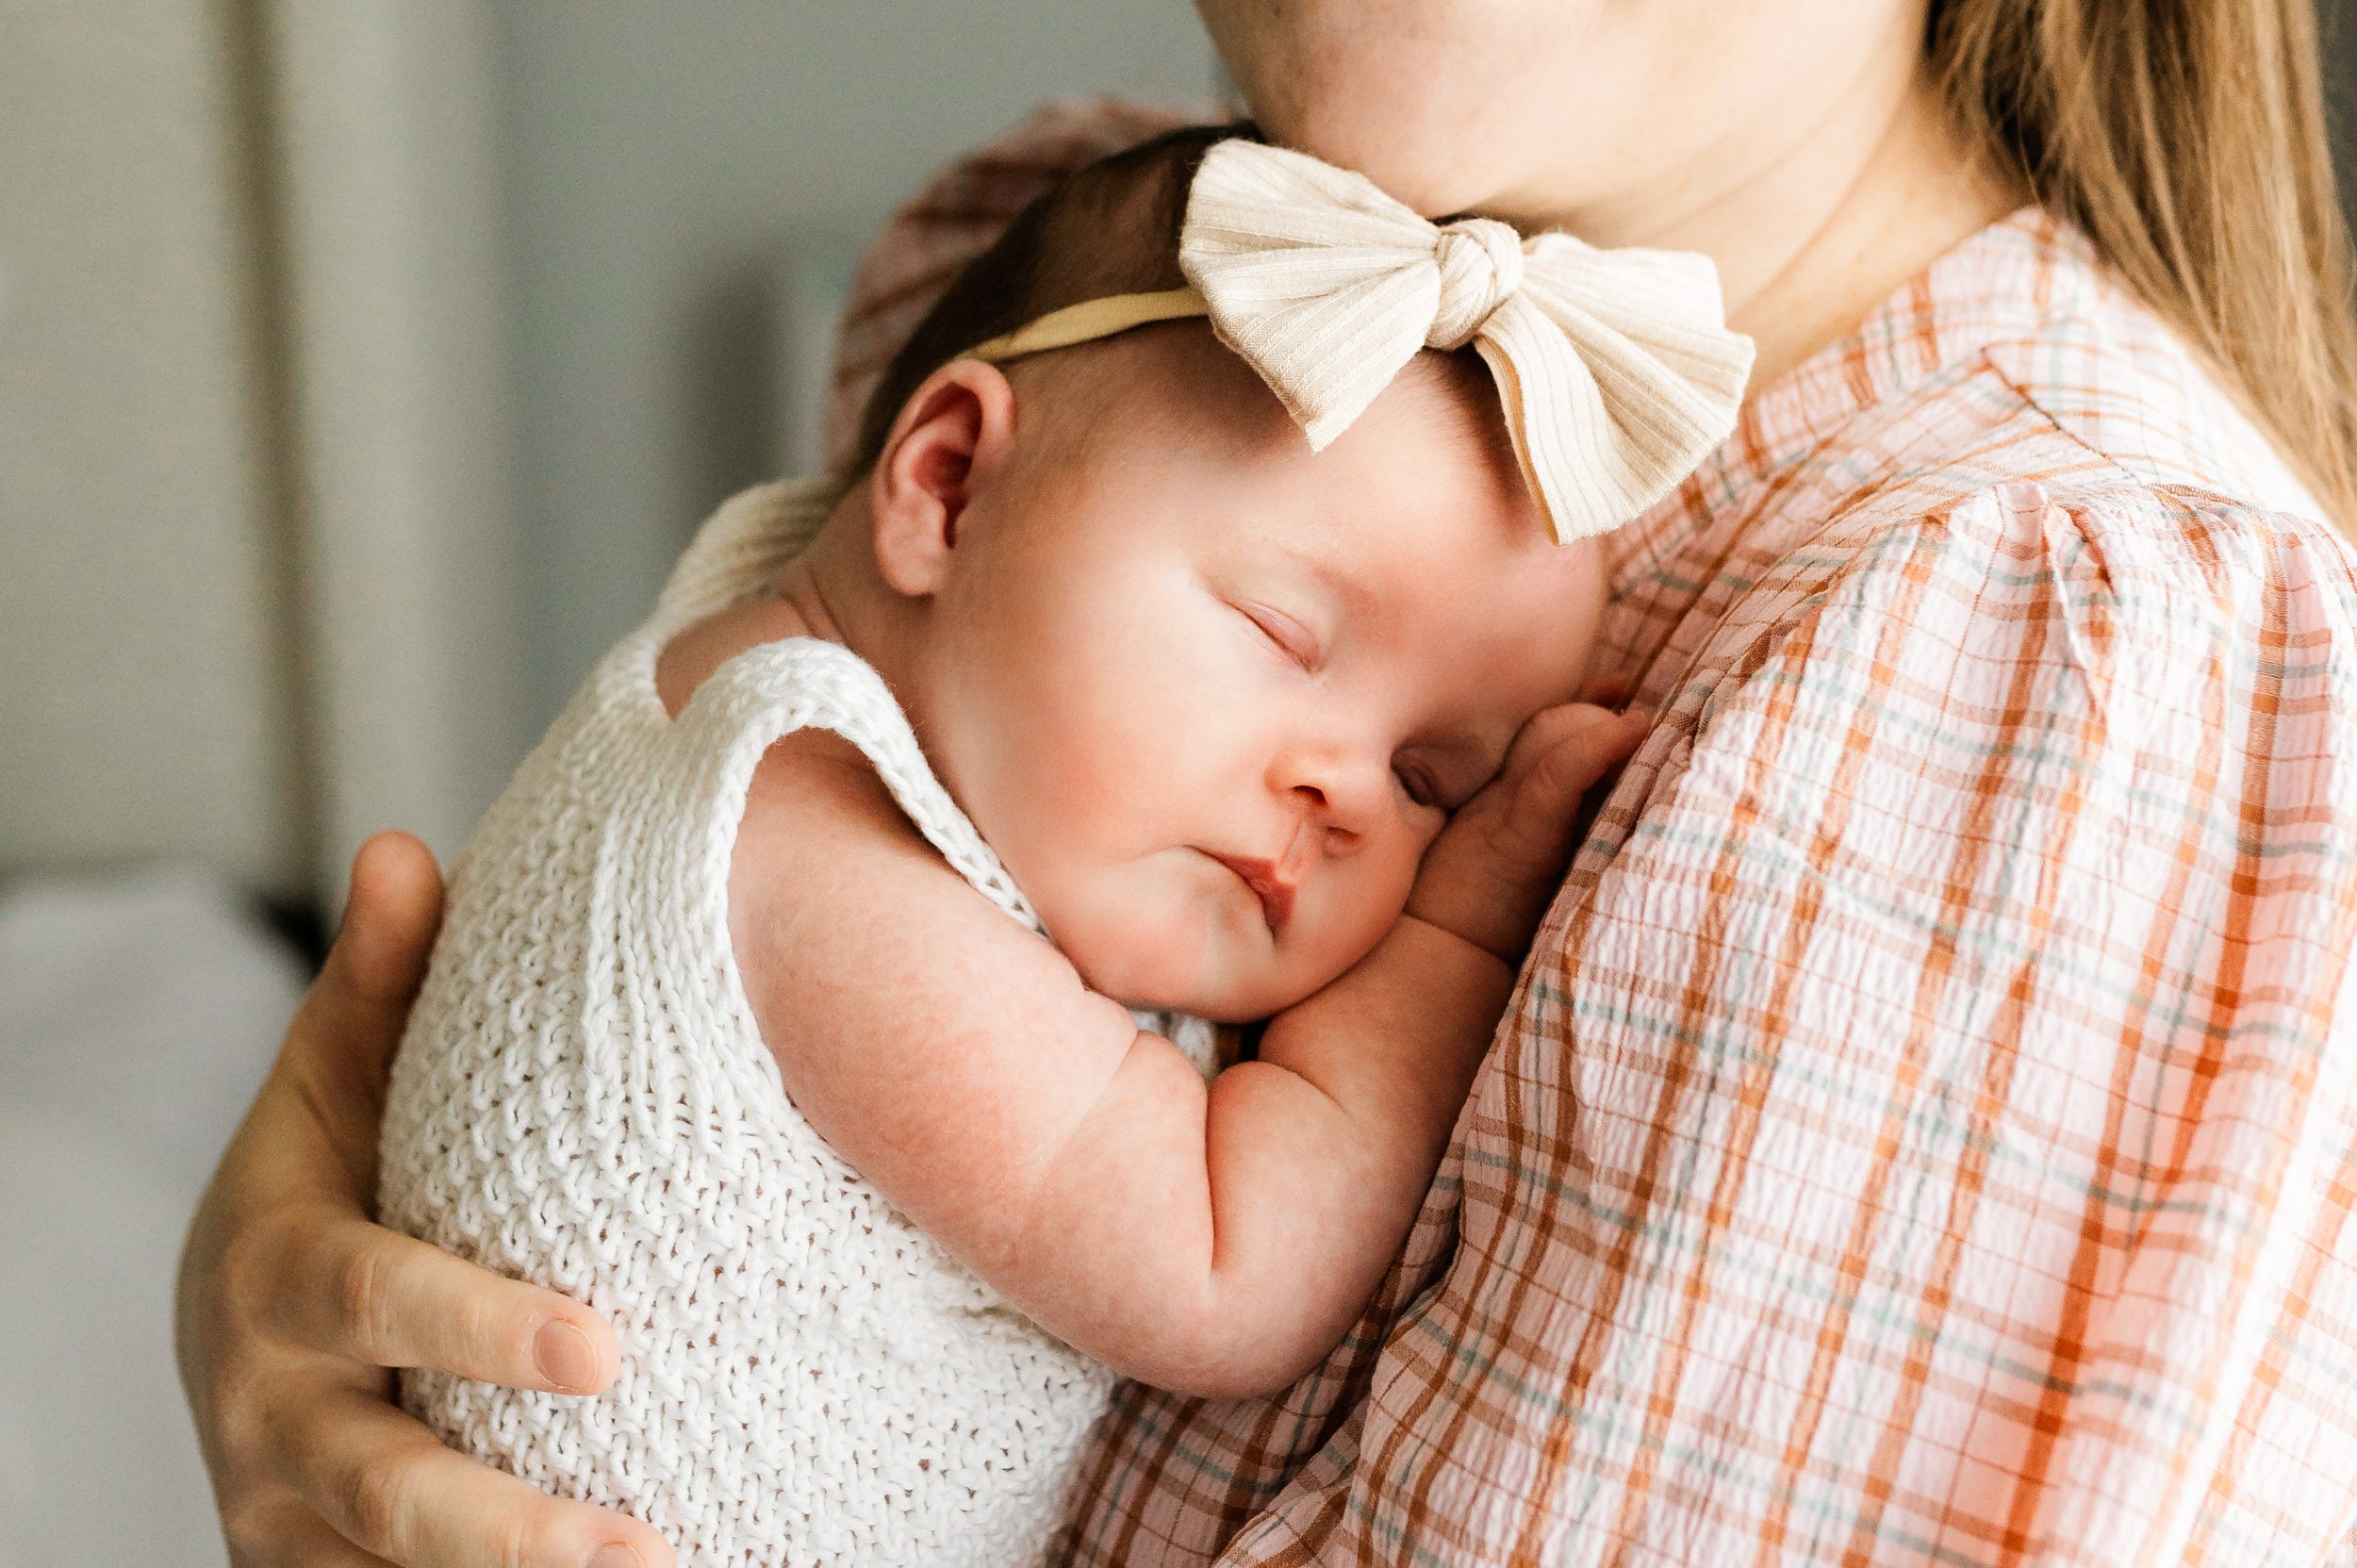 a close up picture of a baby girl wearing a white textured knit romper sleeping peacefully snuggled up against her mom's chest during a Collegeville in home newborn photo session